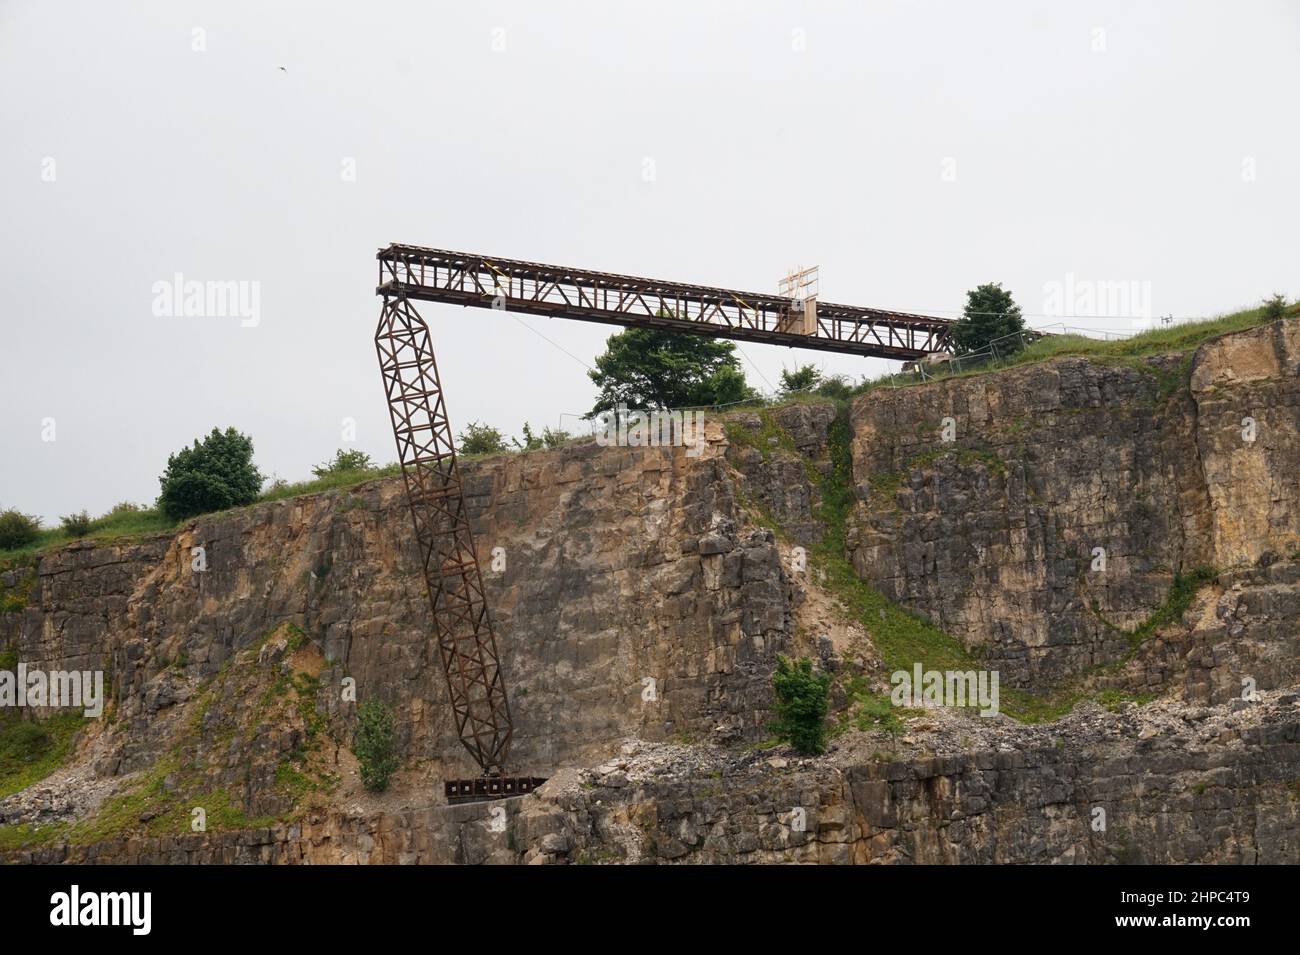 A fake railway bridge built over a disused quarry in the Peak District, UK, for a stunt involving a train crash for the film Mission Impossible 7. Stock Photo